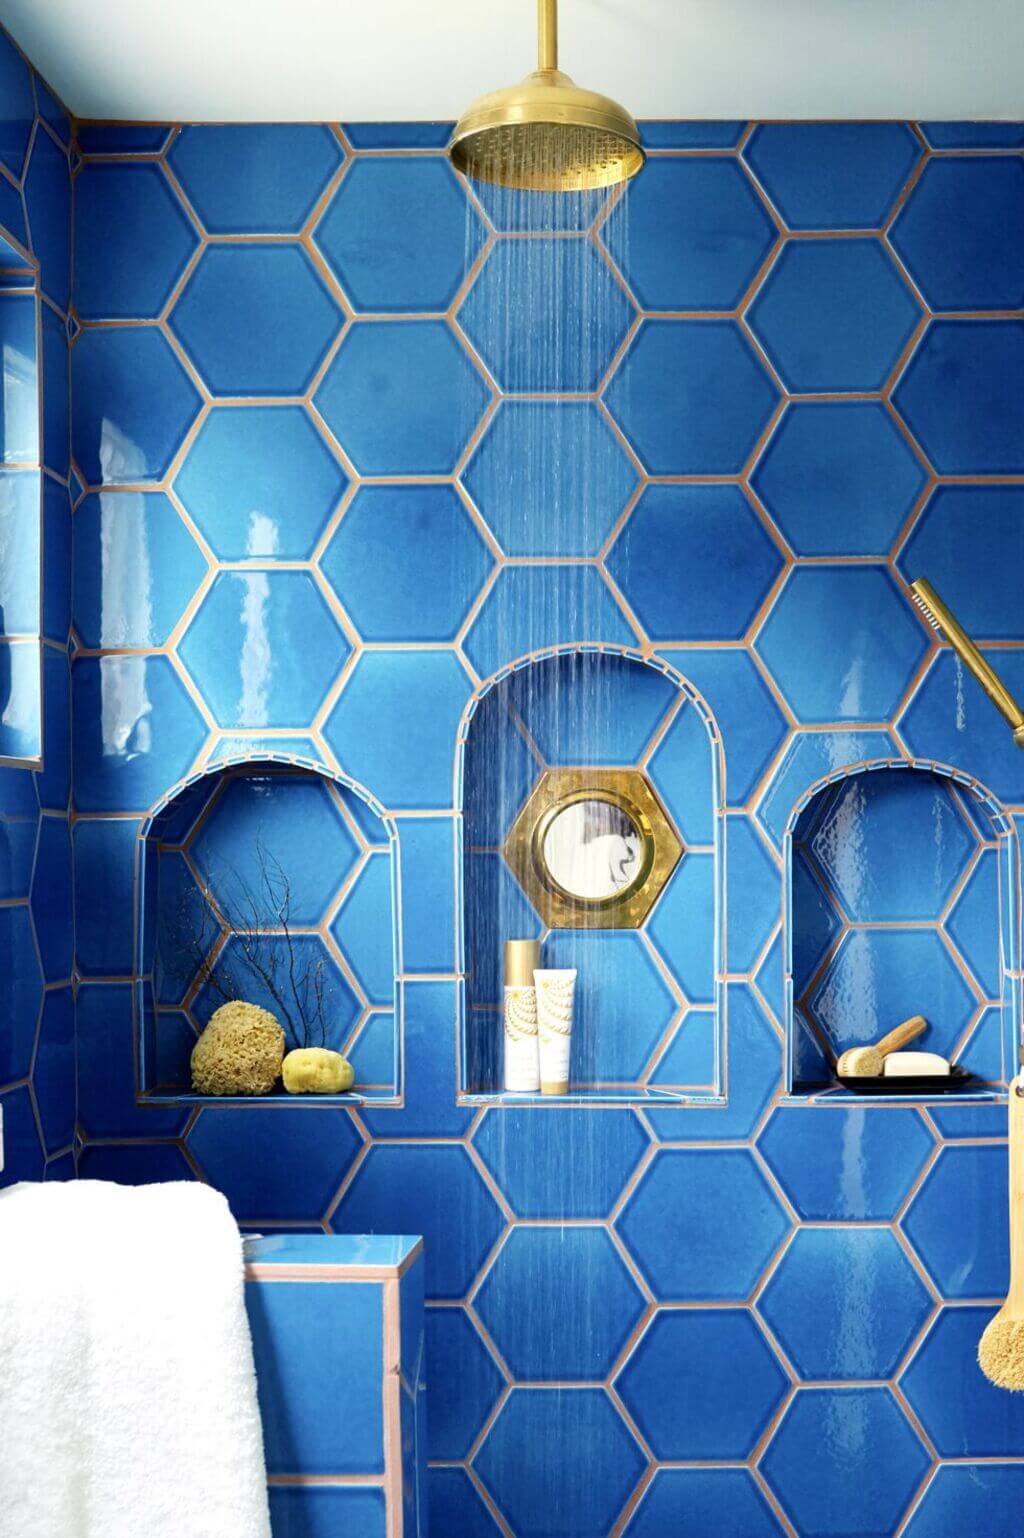 A bathroom with blue tiles and gold fixtures
